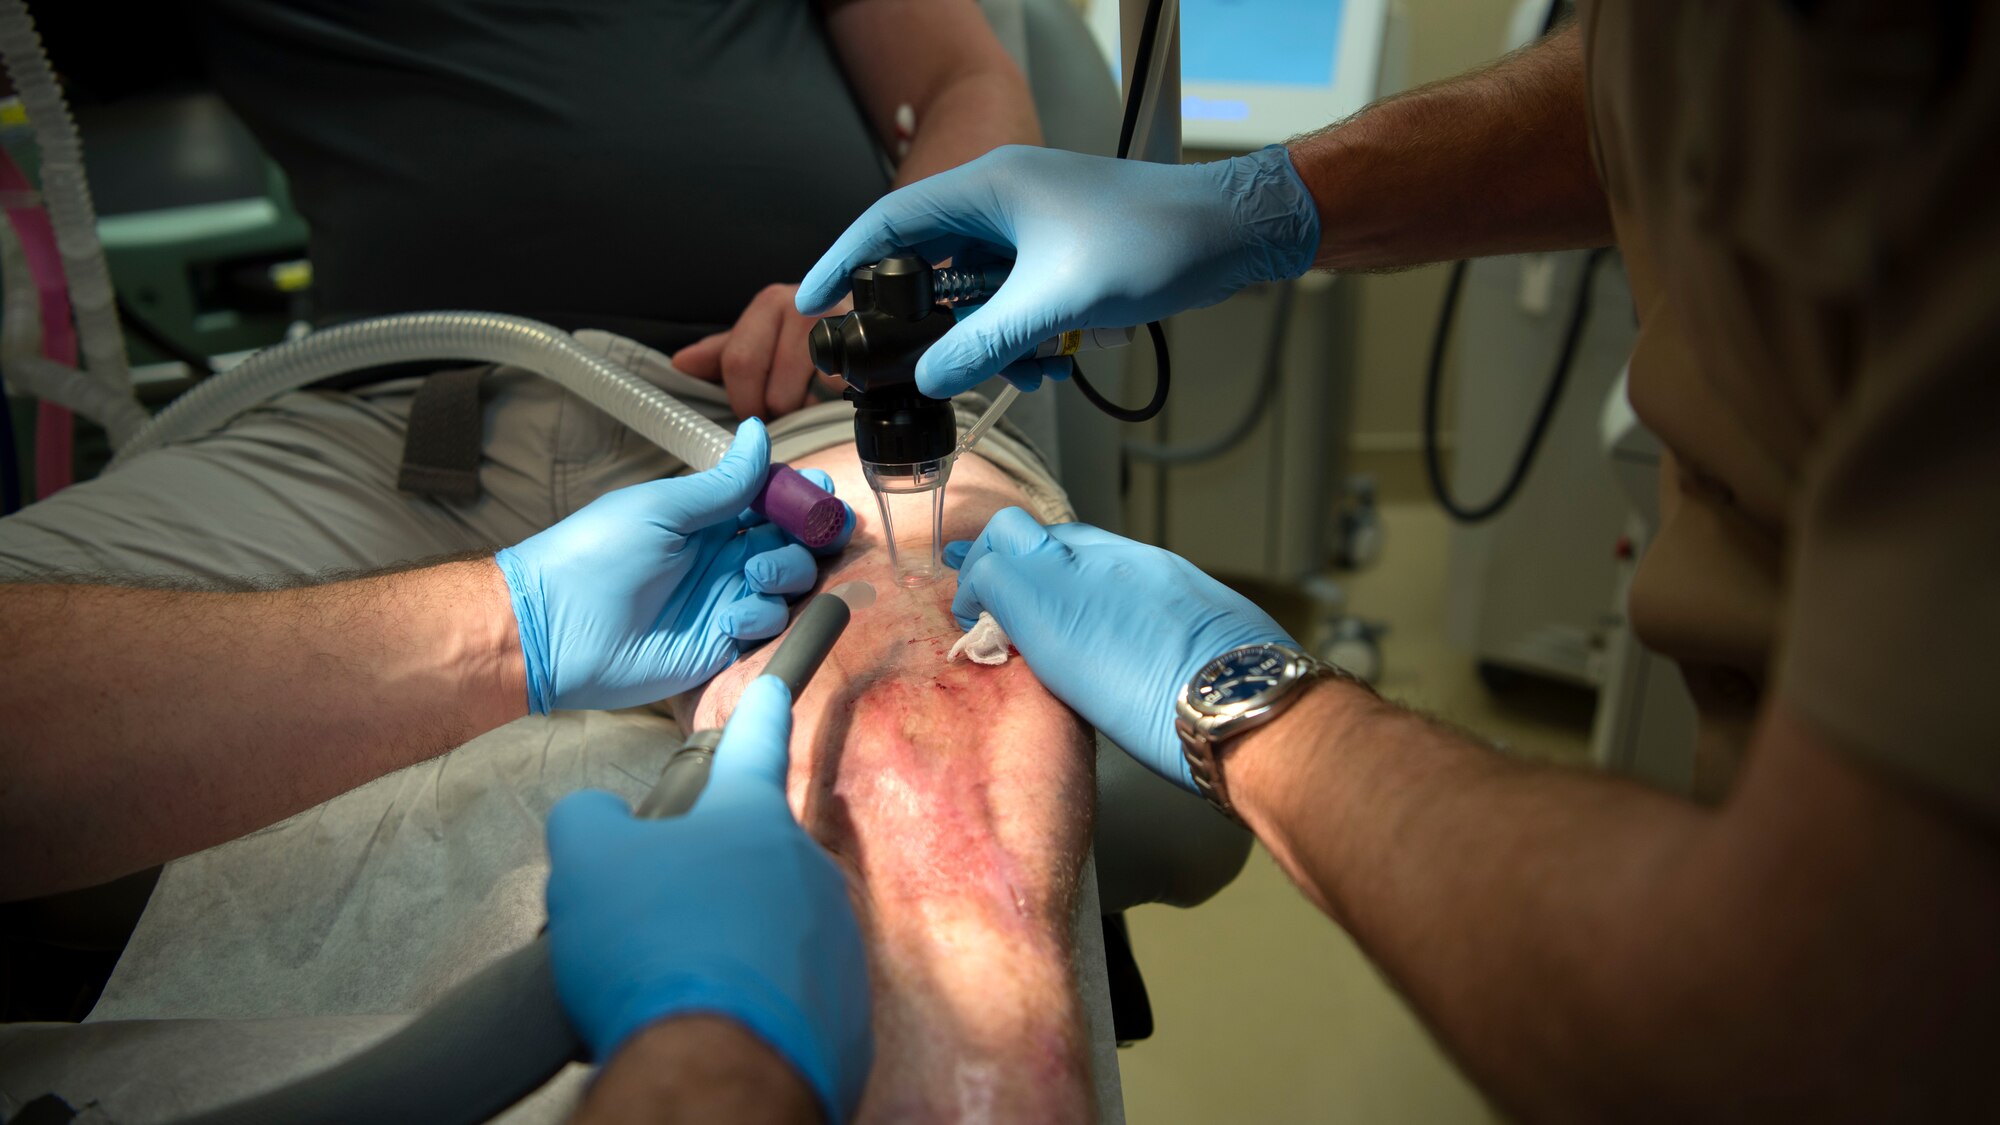 Ret. U.S. Army Staff Sgt. Daniel Burgess, a wouded warrior, receives a carbon dioxide laser treatment at the MacDill Air Force Base, Fla., scar clinic Feb. 15, 2019. The wounded-warrior-focused clinic offers a variety of treatments for those who suffer from scarring as a result of blast injuries, burns, amputations, and other surgeries.